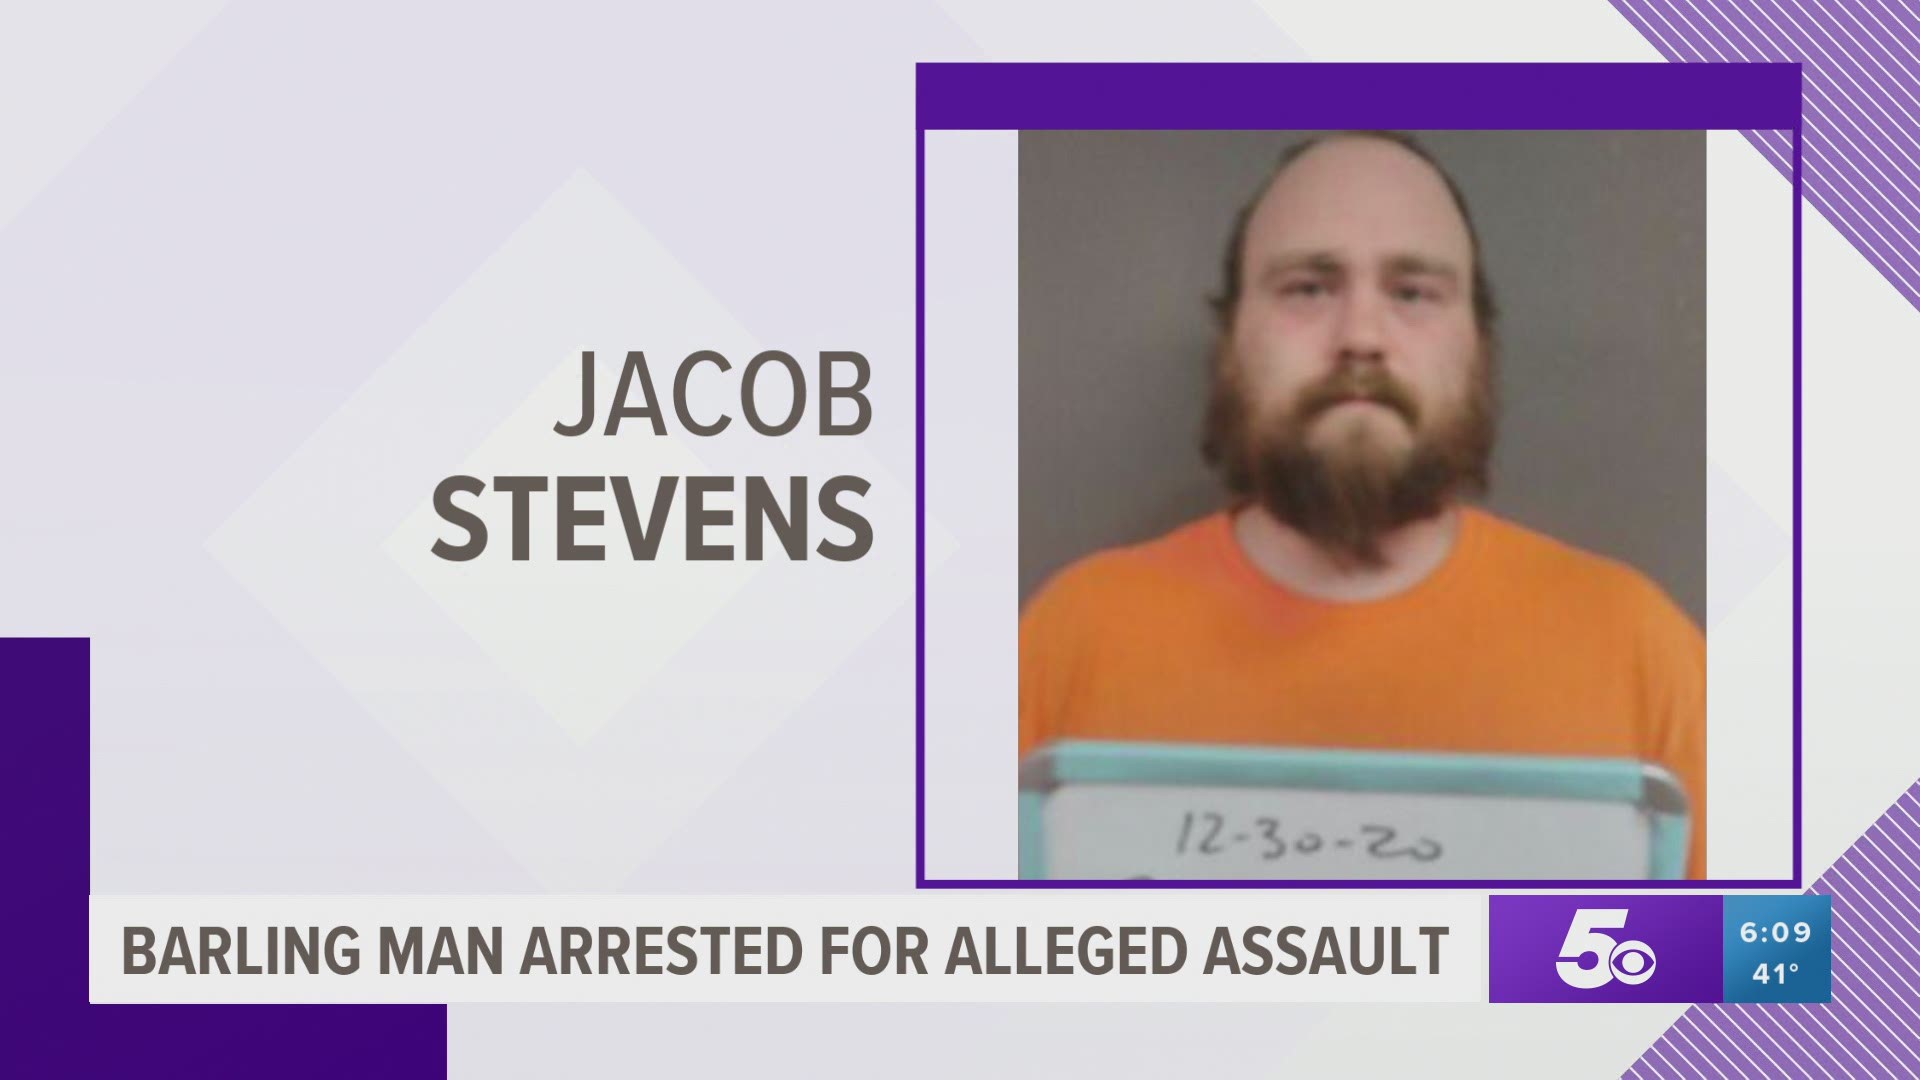 Barling man arrested for alleged sexual assault